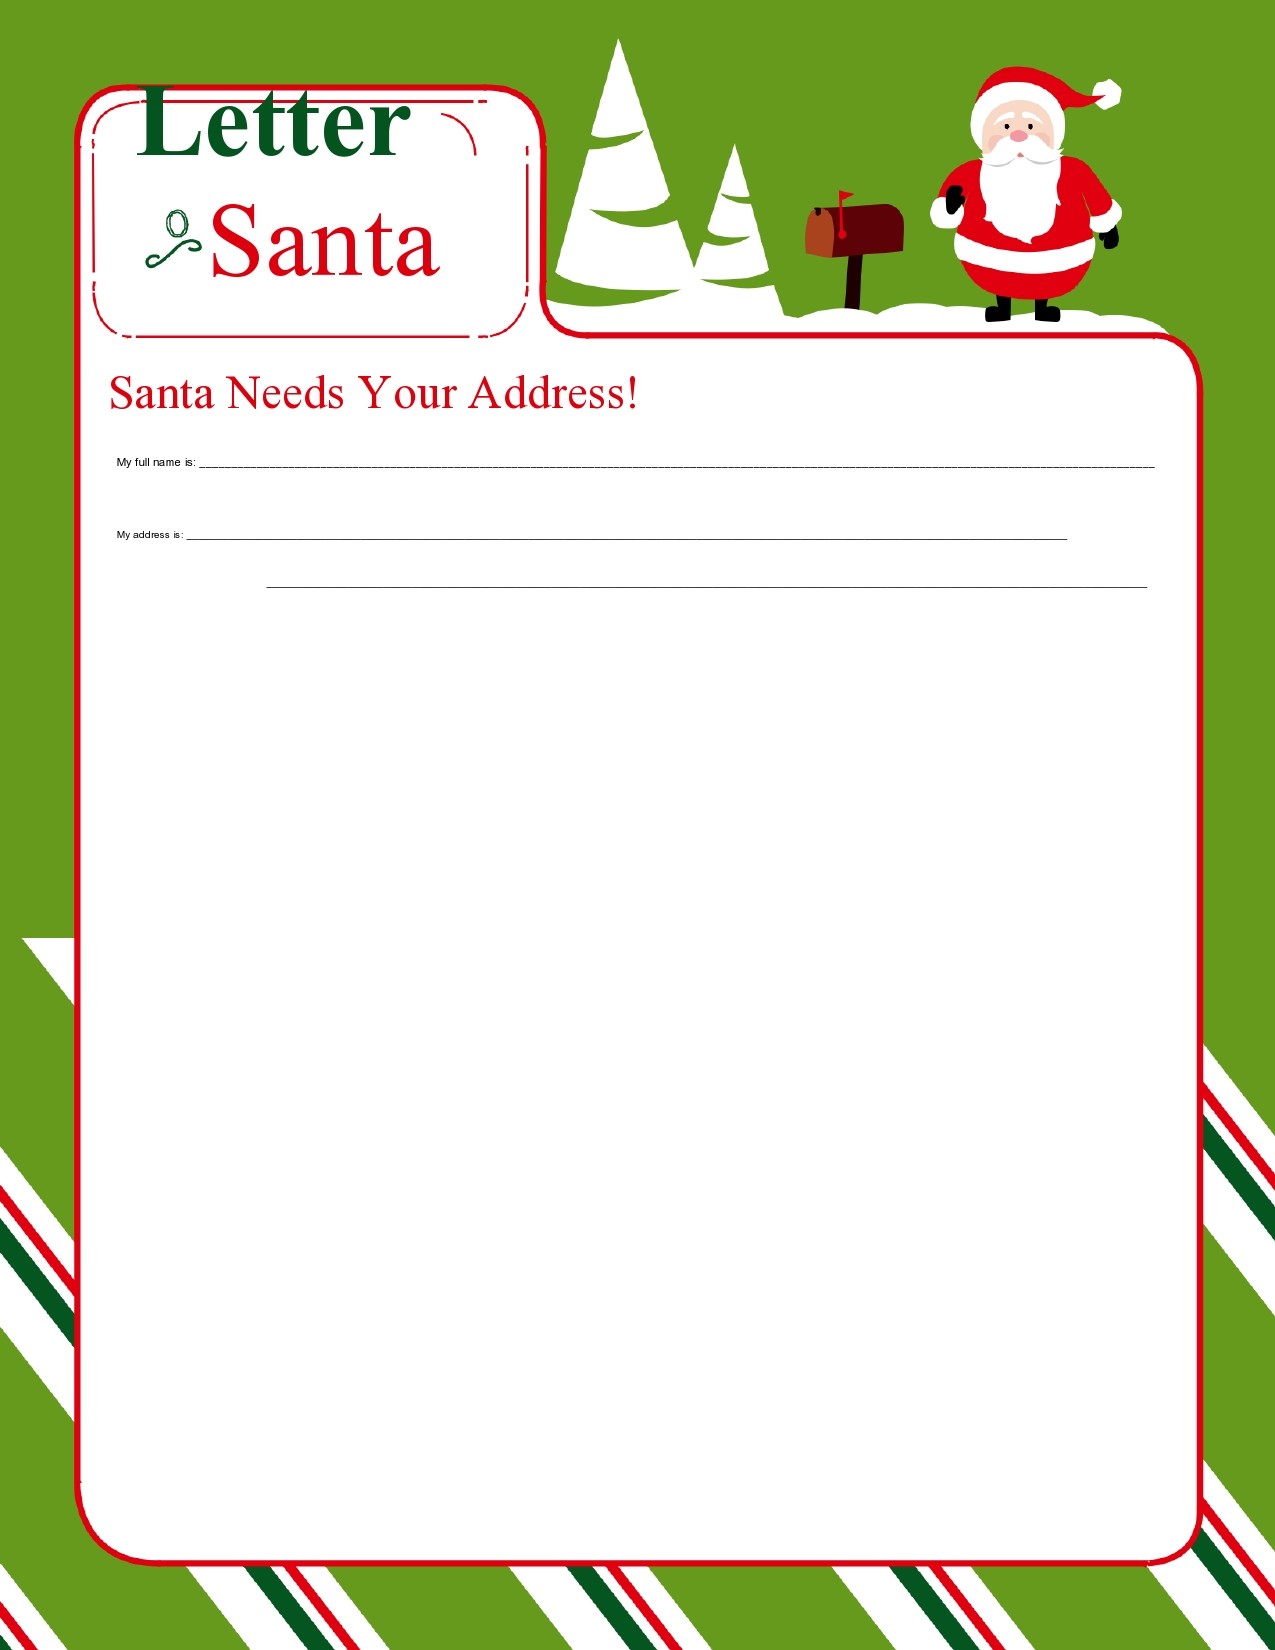 Printable Christmas Letter Templates from templatelab.com